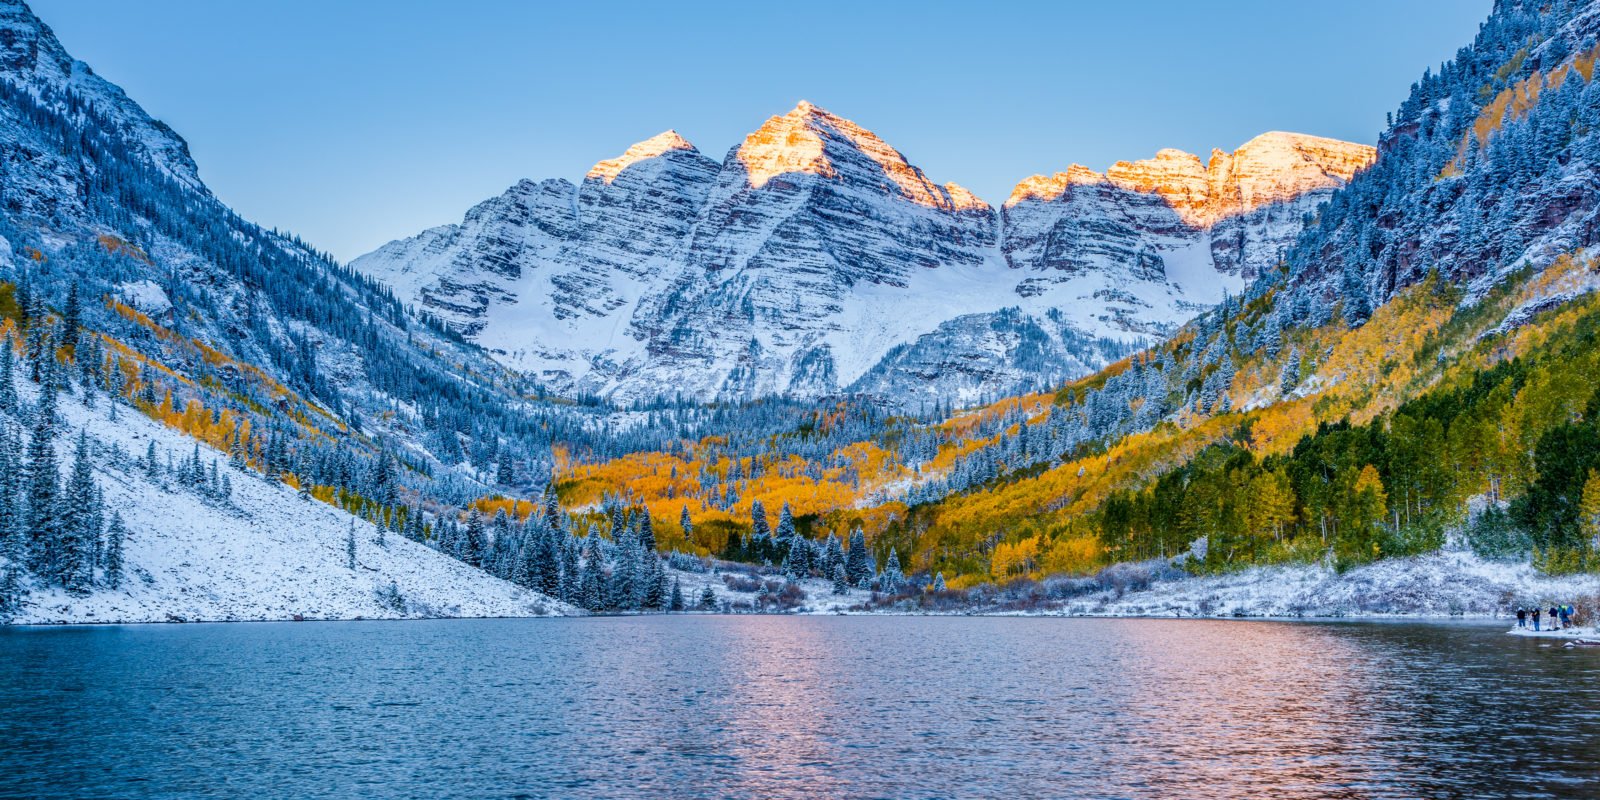 Aspen maroon bells with snow and fall leaves .jpeg